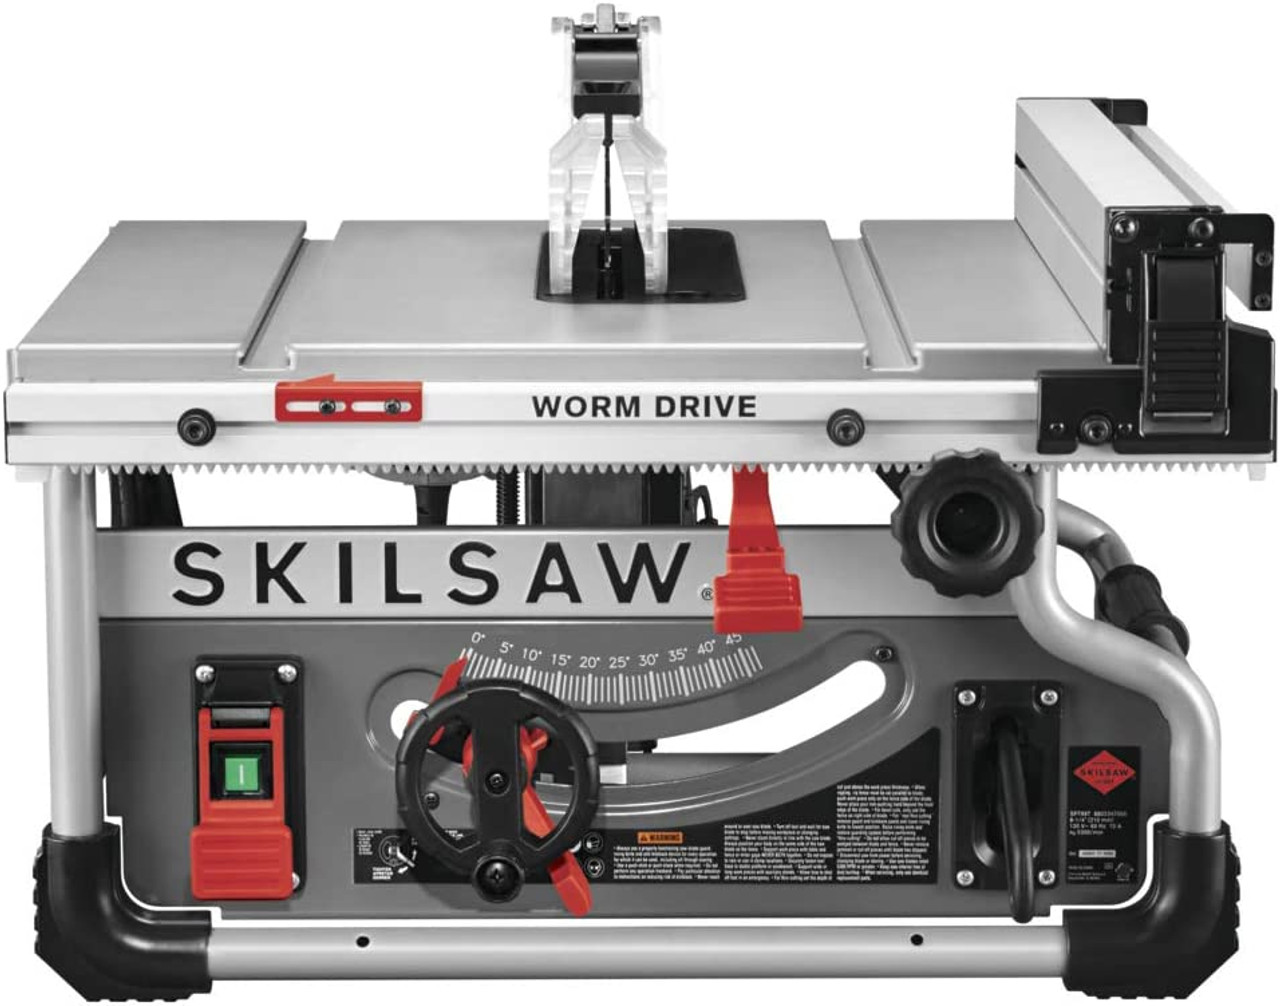 Skil spt99t-01 8-1/4 inch portable worm drive table saw JB Tools